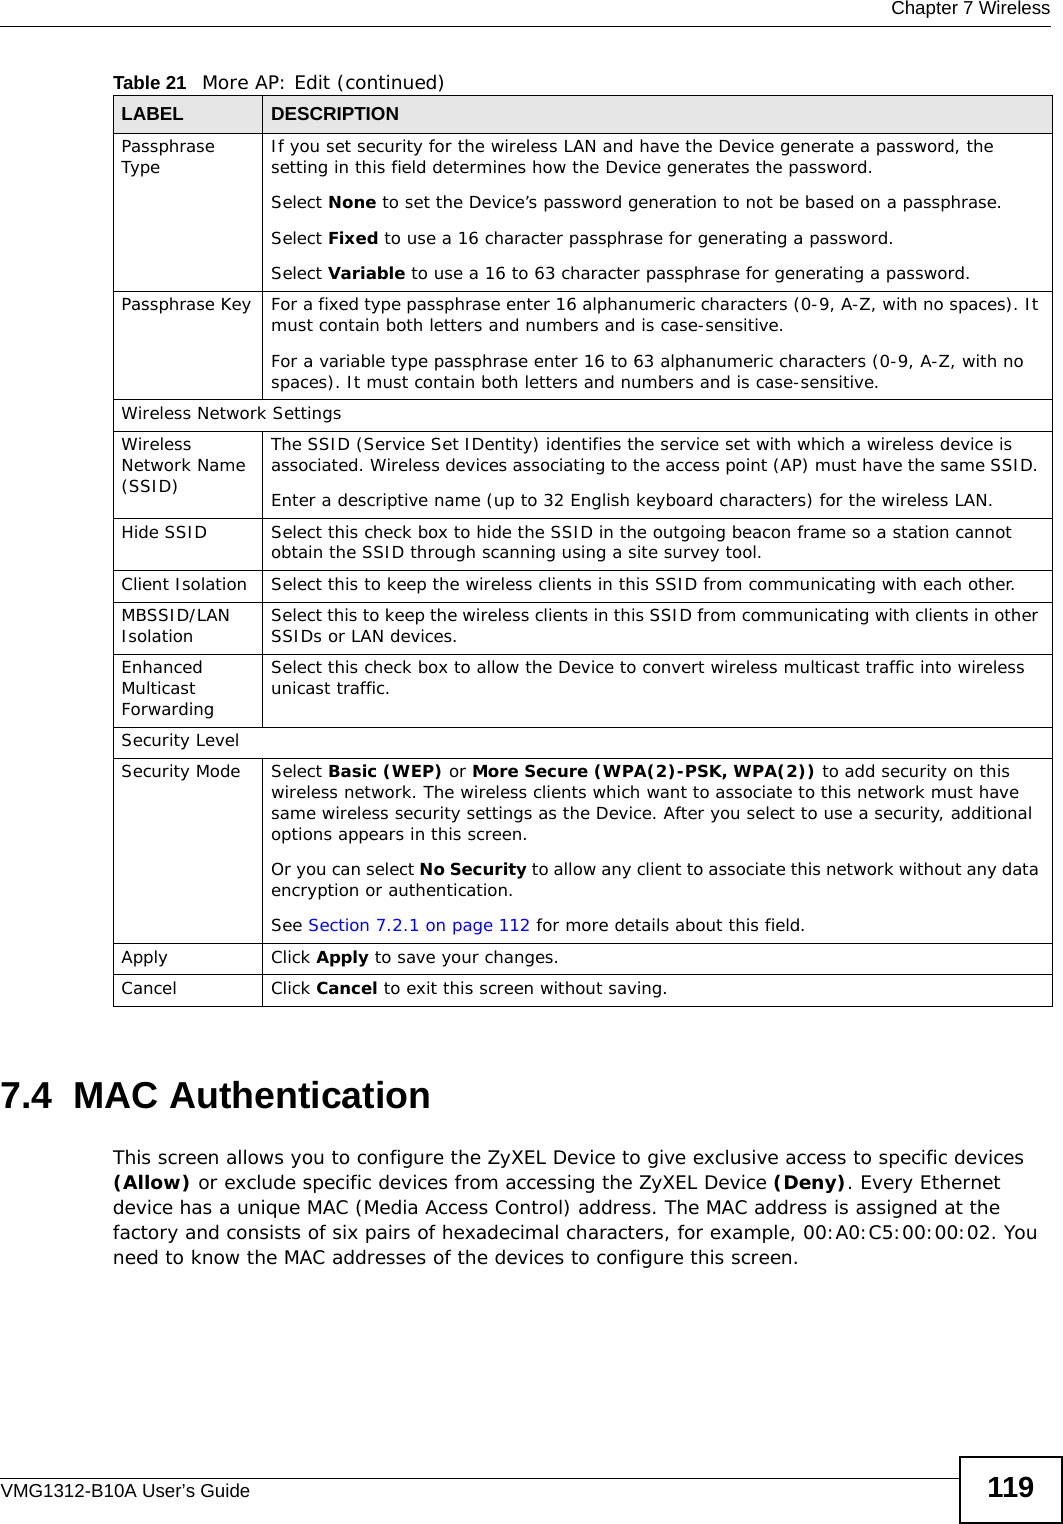  Chapter 7 WirelessVMG1312-B10A User’s Guide 1197.4  MAC Authentication    This screen allows you to configure the ZyXEL Device to give exclusive access to specific devices (Allow) or exclude specific devices from accessing the ZyXEL Device (Deny). Every Ethernet device has a unique MAC (Media Access Control) address. The MAC address is assigned at the factory and consists of six pairs of hexadecimal characters, for example, 00:A0:C5:00:00:02. You need to know the MAC addresses of the devices to configure this screen.Passphrase Type If you set security for the wireless LAN and have the Device generate a password, the setting in this field determines how the Device generates the password.Select None to set the Device’s password generation to not be based on a passphrase. Select Fixed to use a 16 character passphrase for generating a password.Select Variable to use a 16 to 63 character passphrase for generating a password.Passphrase Key For a fixed type passphrase enter 16 alphanumeric characters (0-9, A-Z, with no spaces). It must contain both letters and numbers and is case-sensitive.For a variable type passphrase enter 16 to 63 alphanumeric characters (0-9, A-Z, with no spaces). It must contain both letters and numbers and is case-sensitive.Wireless Network SettingsWireless Network Name (SSID)The SSID (Service Set IDentity) identifies the service set with which a wireless device is associated. Wireless devices associating to the access point (AP) must have the same SSID. Enter a descriptive name (up to 32 English keyboard characters) for the wireless LAN. Hide SSID Select this check box to hide the SSID in the outgoing beacon frame so a station cannot obtain the SSID through scanning using a site survey tool.Client Isolation  Select this to keep the wireless clients in this SSID from communicating with each other.MBSSID/LAN Isolation  Select this to keep the wireless clients in this SSID from communicating with clients in other SSIDs or LAN devices.Enhanced Multicast Forwarding Select this check box to allow the Device to convert wireless multicast traffic into wireless unicast traffic.Security LevelSecurity Mode Select Basic (WEP) or More Secure (WPA(2)-PSK, WPA(2)) to add security on this wireless network. The wireless clients which want to associate to this network must have same wireless security settings as the Device. After you select to use a security, additional options appears in this screen.  Or you can select No Security to allow any client to associate this network without any data encryption or authentication.See Section 7.2.1 on page 112 for more details about this field.Apply Click Apply to save your changes.Cancel Click Cancel to exit this screen without saving.Table 21   More AP: Edit (continued)LABEL DESCRIPTION